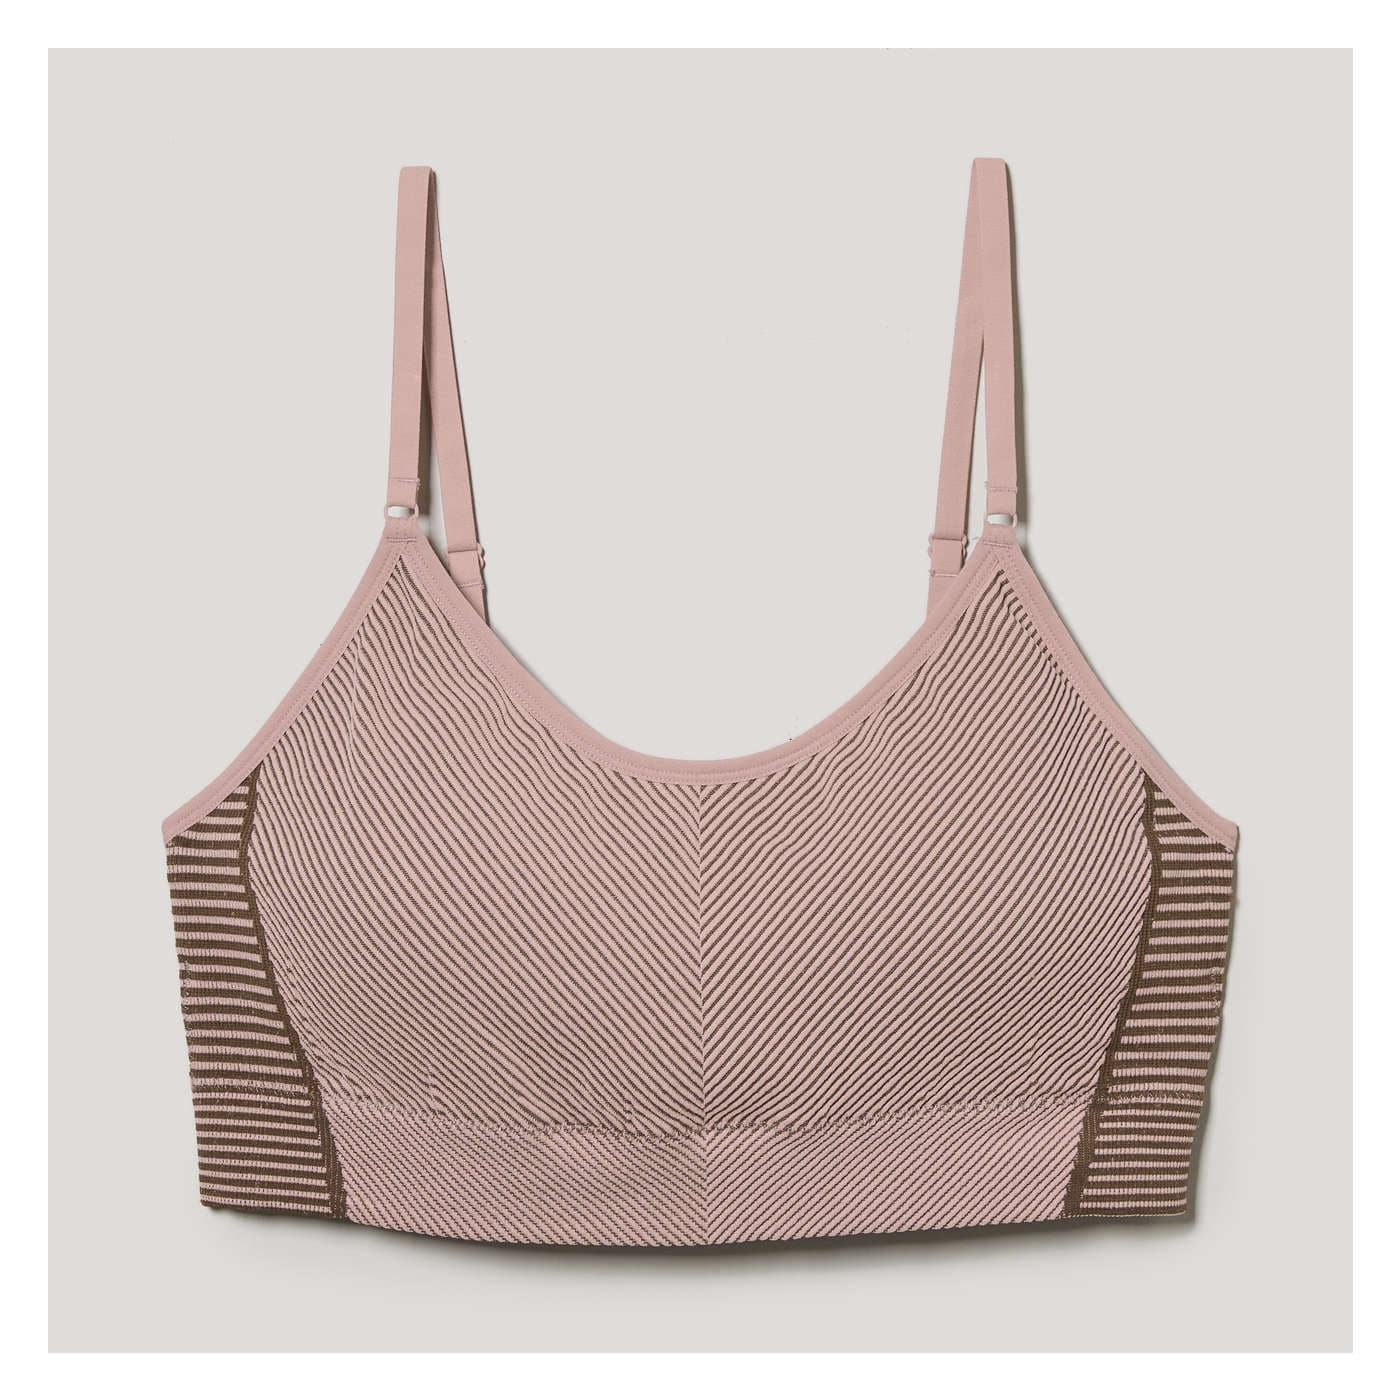 Sports bra for girl in peach pink - Pocket Micro